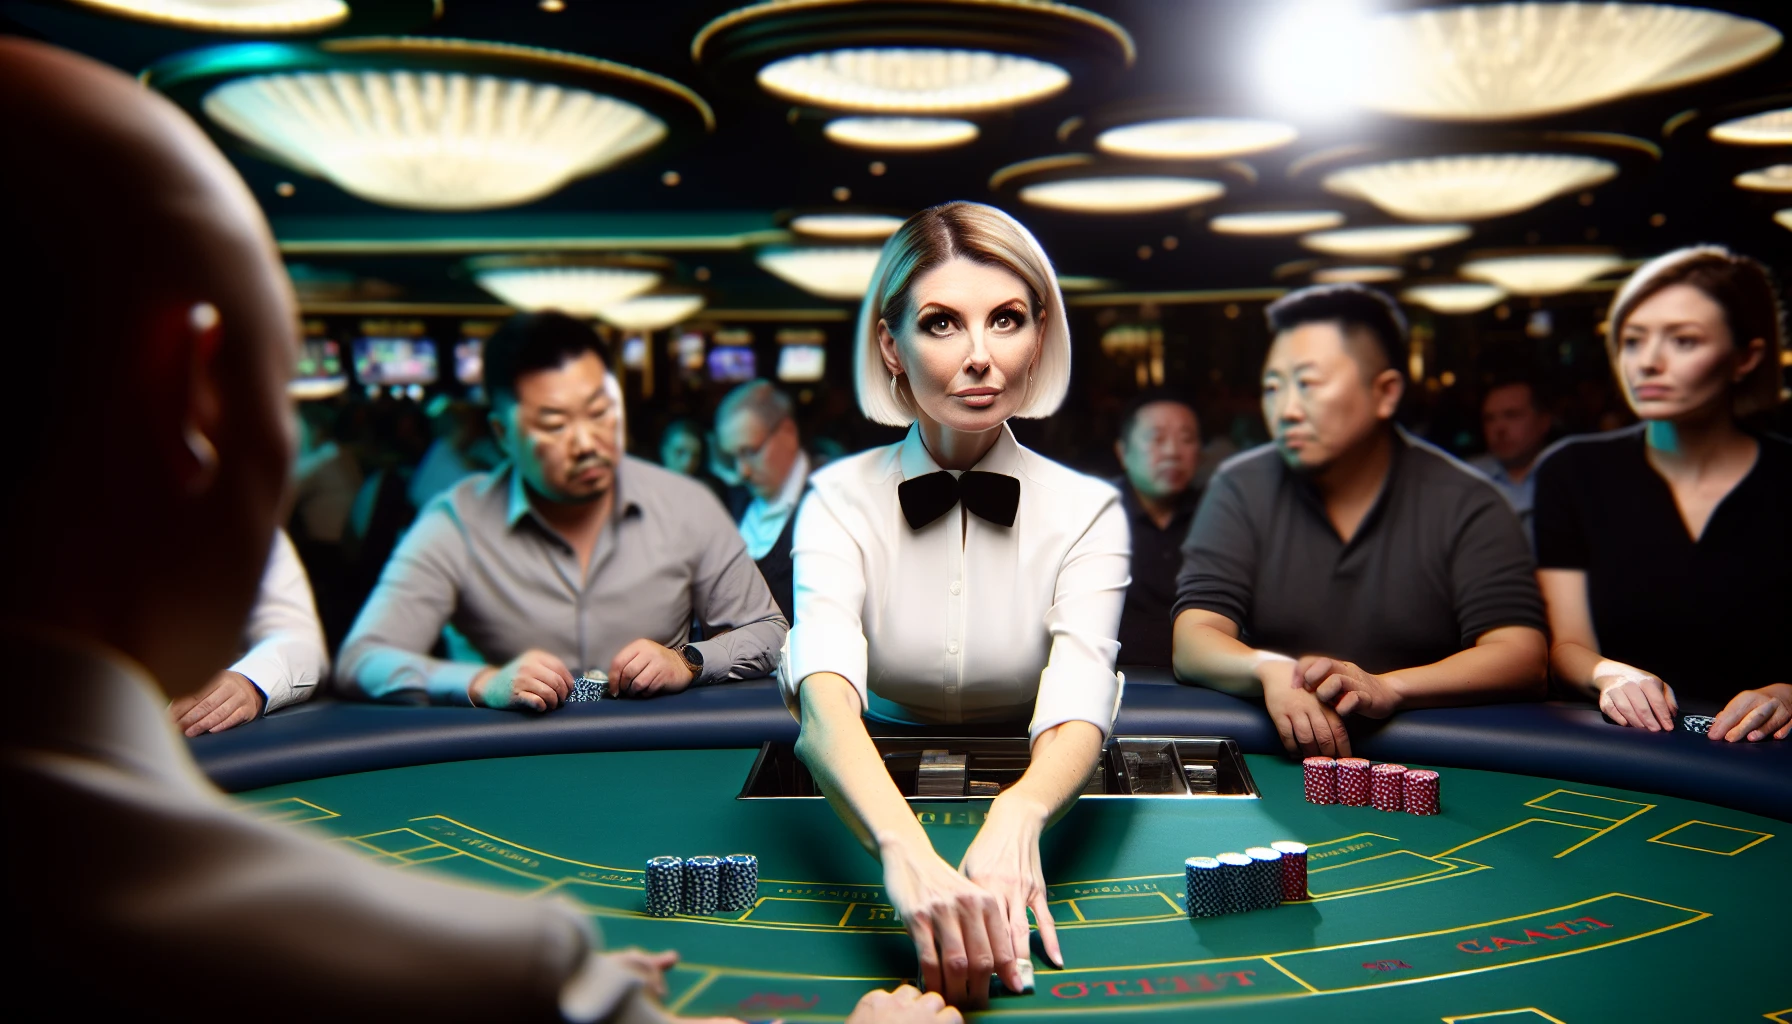 Accurately managing bets and ensuring proper payouts in baccarat